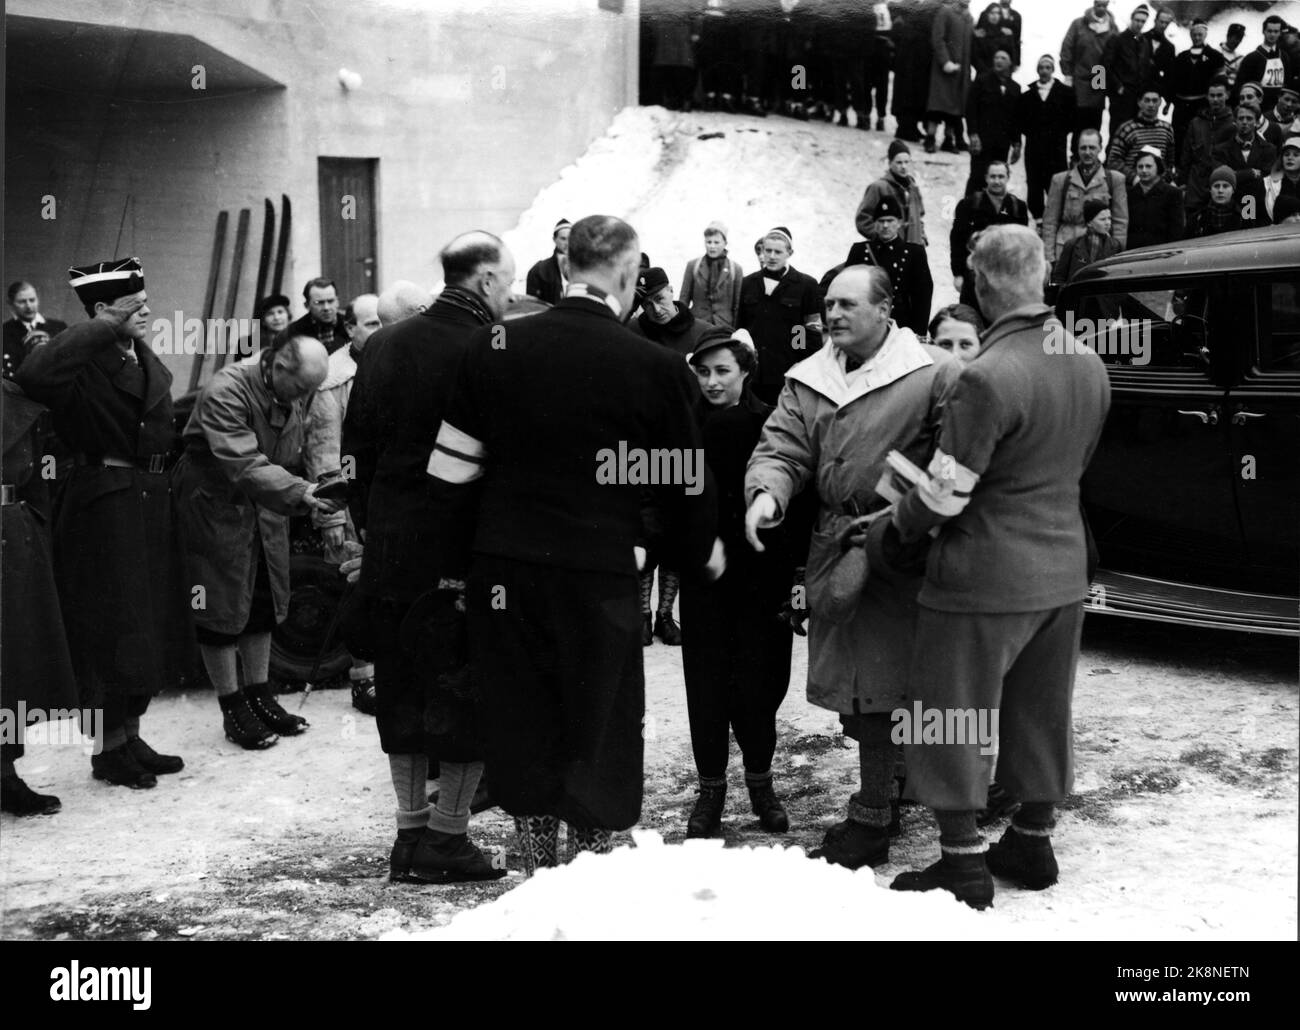 Oslo 19520309. Jumping in Holmenkollen / Holmenkollagen. Crown Prince Olav arrives and is welcomed by the organizers. Together with the Crown Prince is Princess Ragnhild (in the middle). Ntb archive photo / ntb Stock Photo